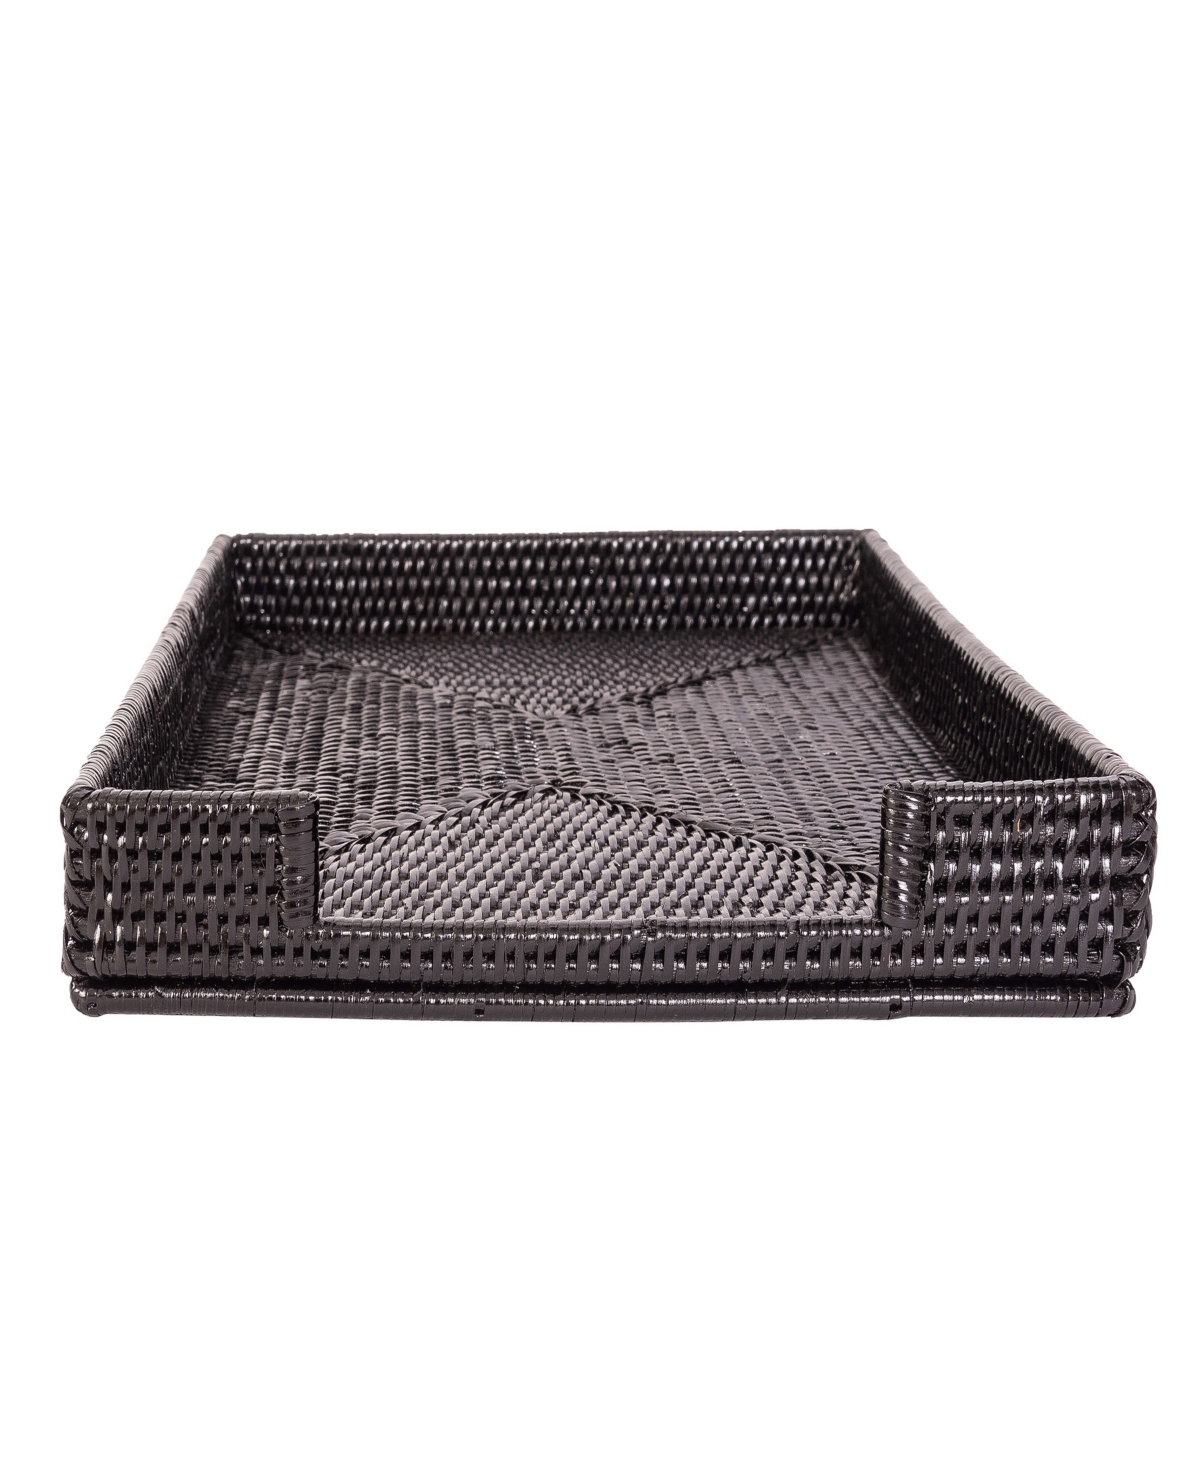 Shop Artifacts Trading Company Rattan Office Paper Tray In Tudor Black